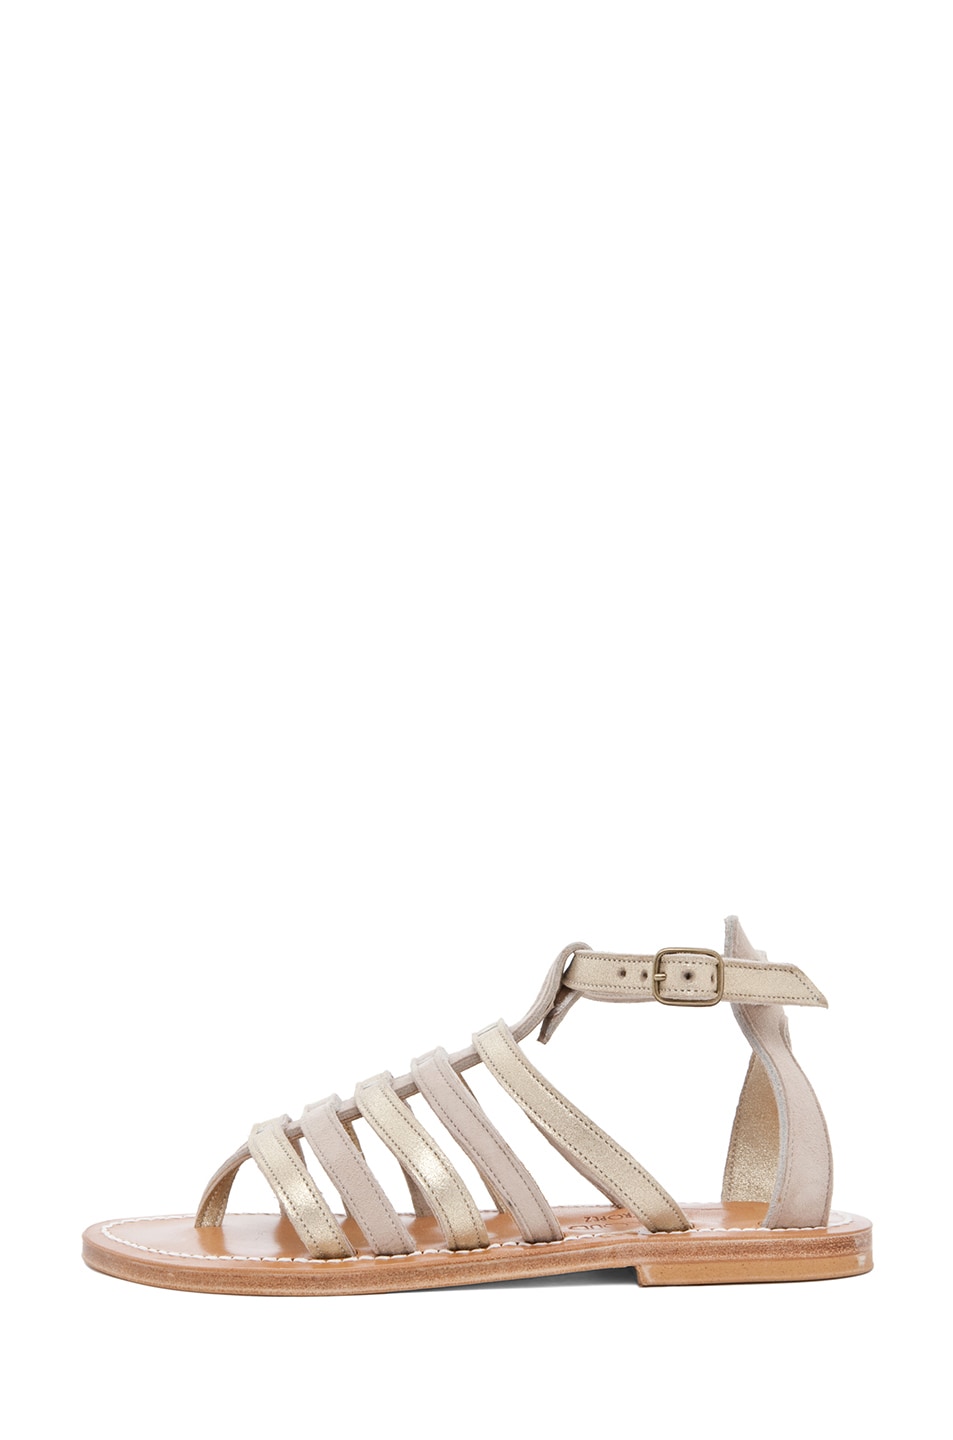 Image 1 of K Jacques Agopos Suede Interbi Gladiator Sandals in Nude & Gold